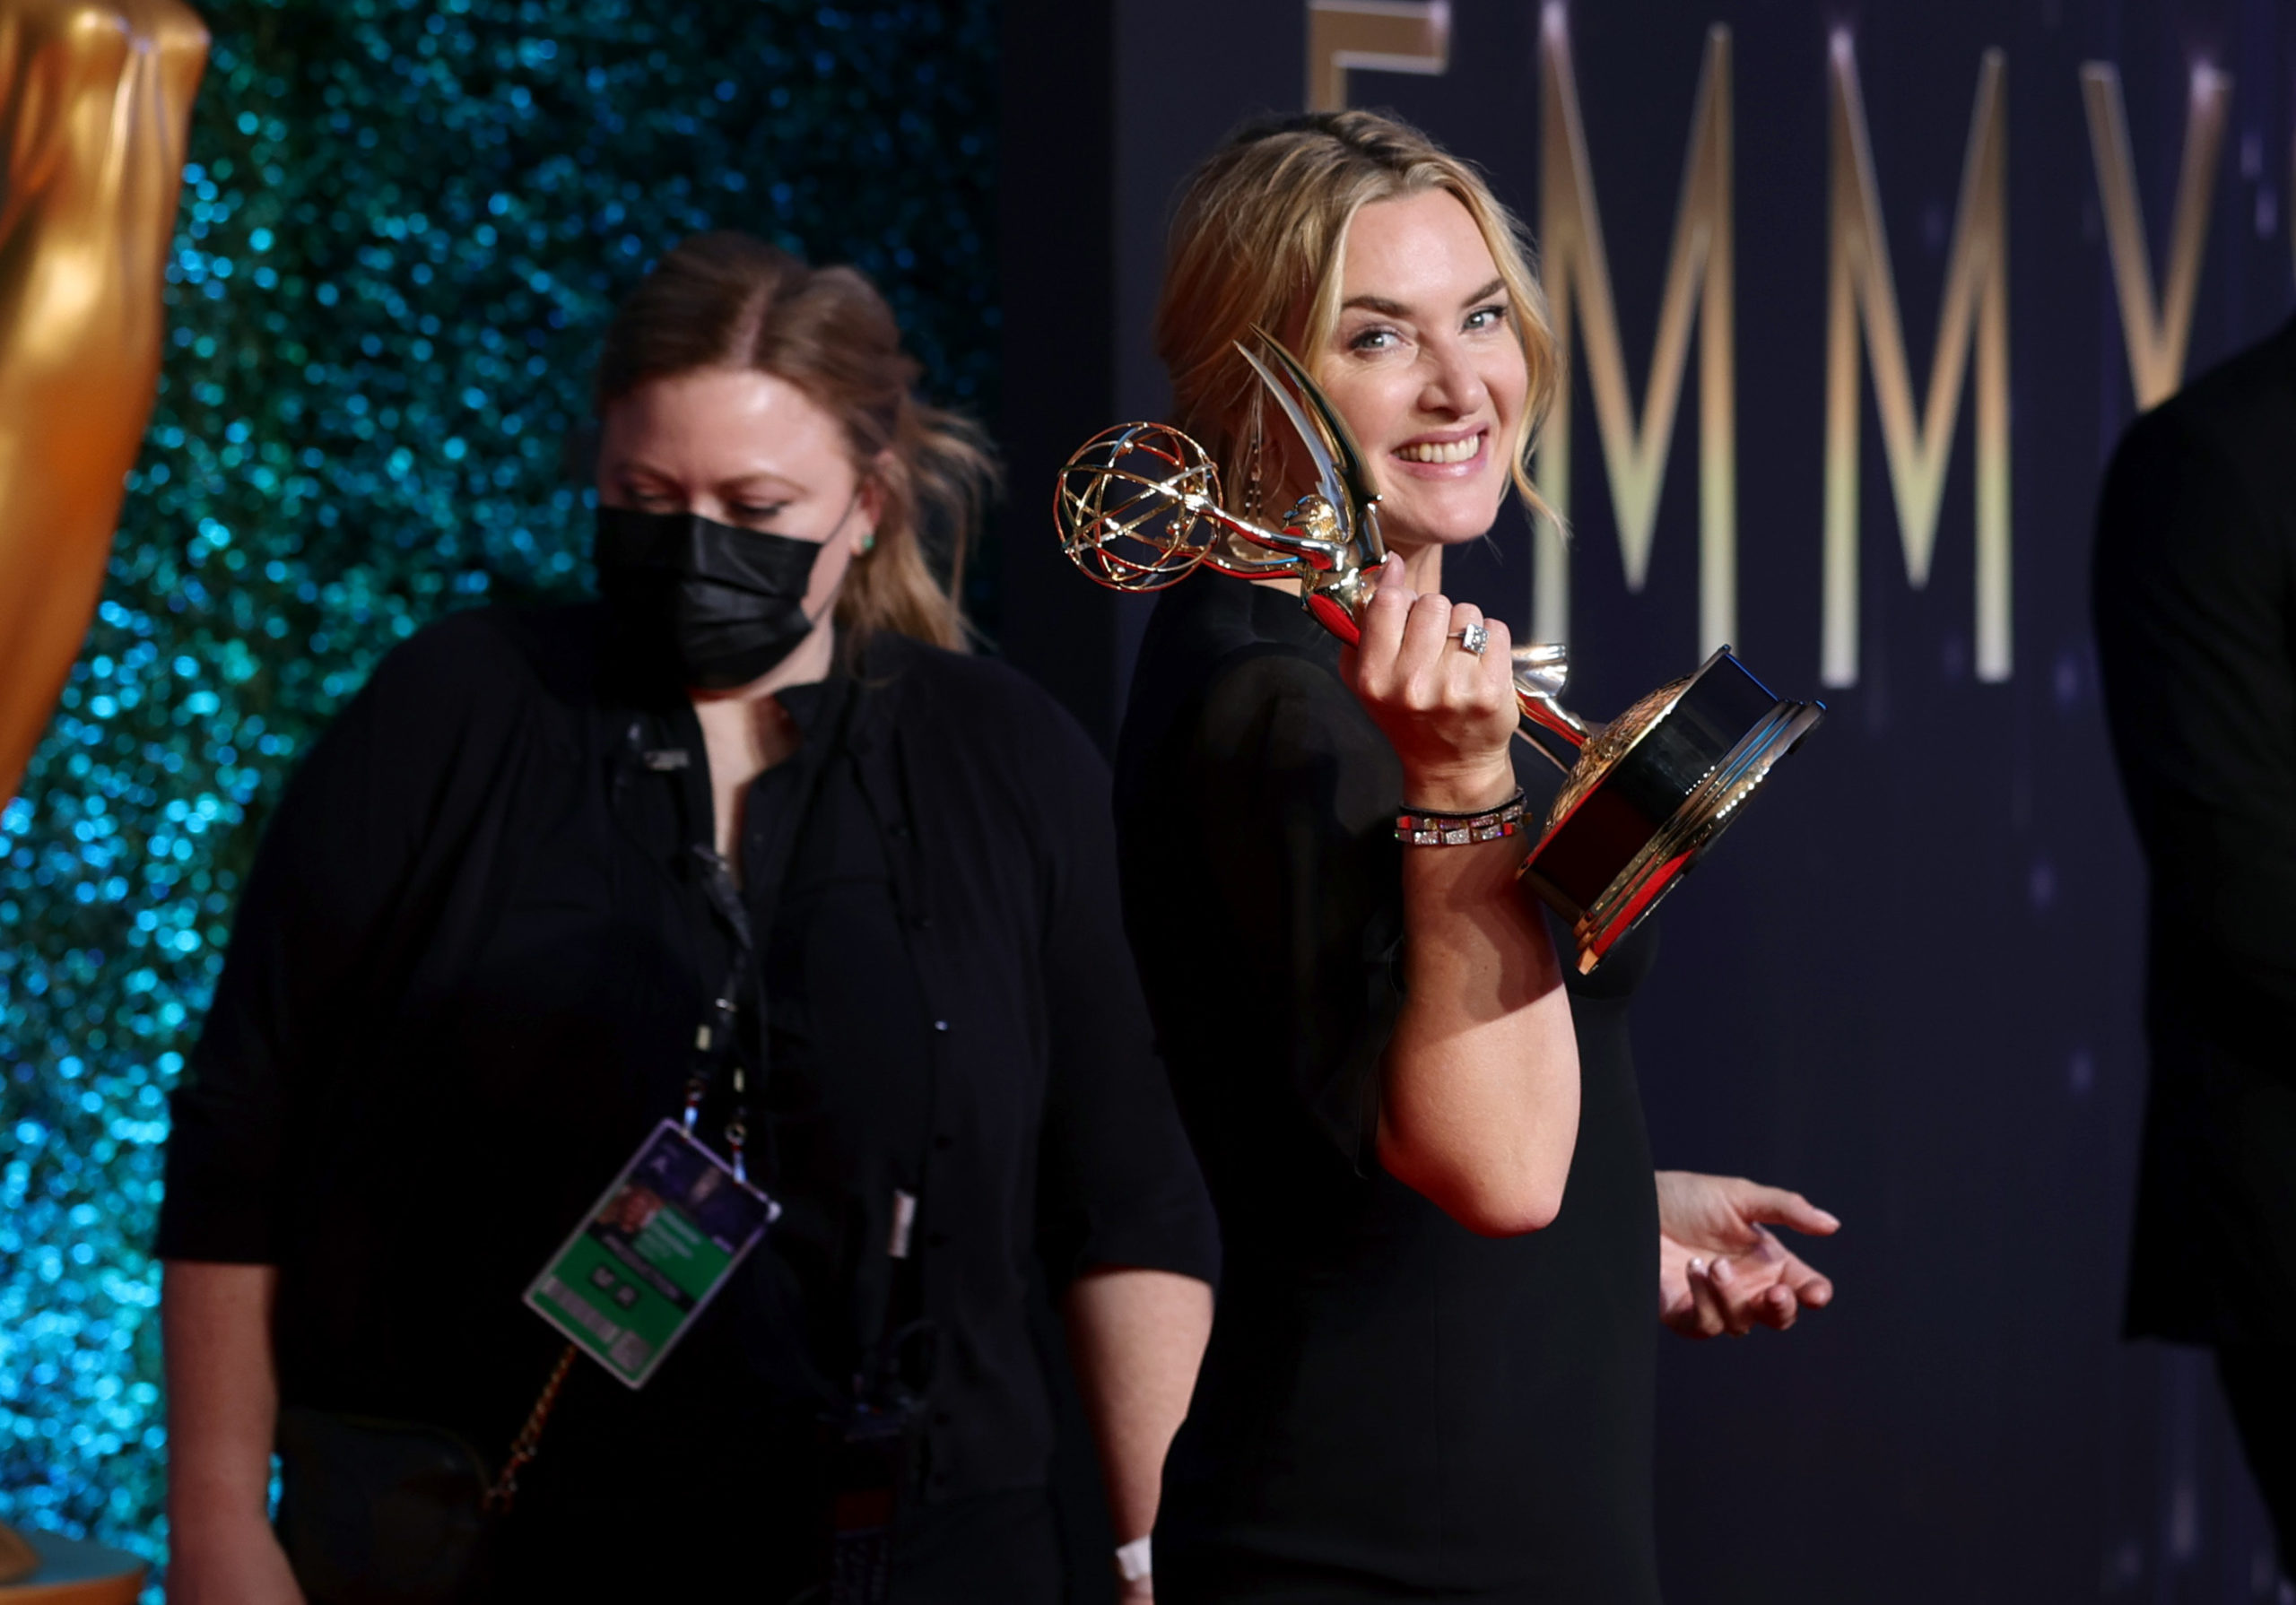 Kate Winslet, winner of the Outstanding Lead Actress in a Limited or Anthology Series or Movie award for 'Mare Of Easttown,' poses in the press room during the 73rd Primetime Emmy Awards at L.A. LIVE on September 19, 2021 in Los Angeles, California. (Photo by Rich Fury/Getty Images)